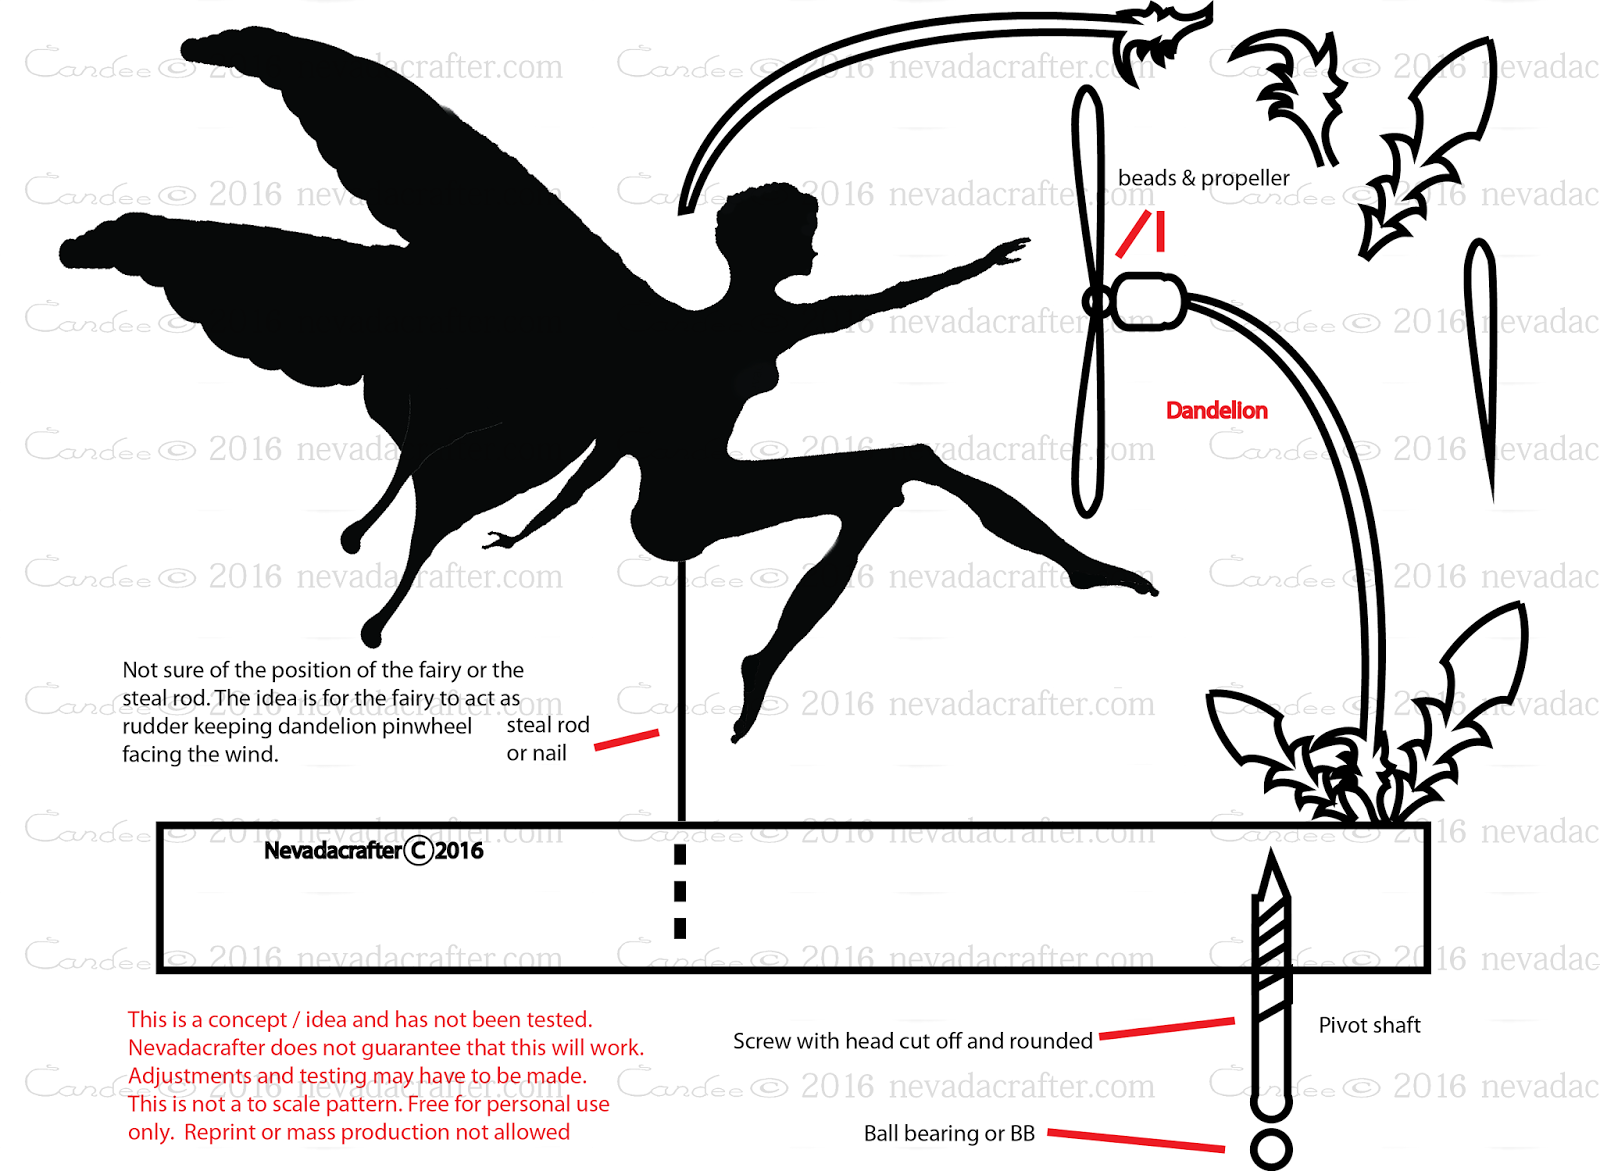 Free Patterns and ideas: Fairy whirligig / weathervane concept